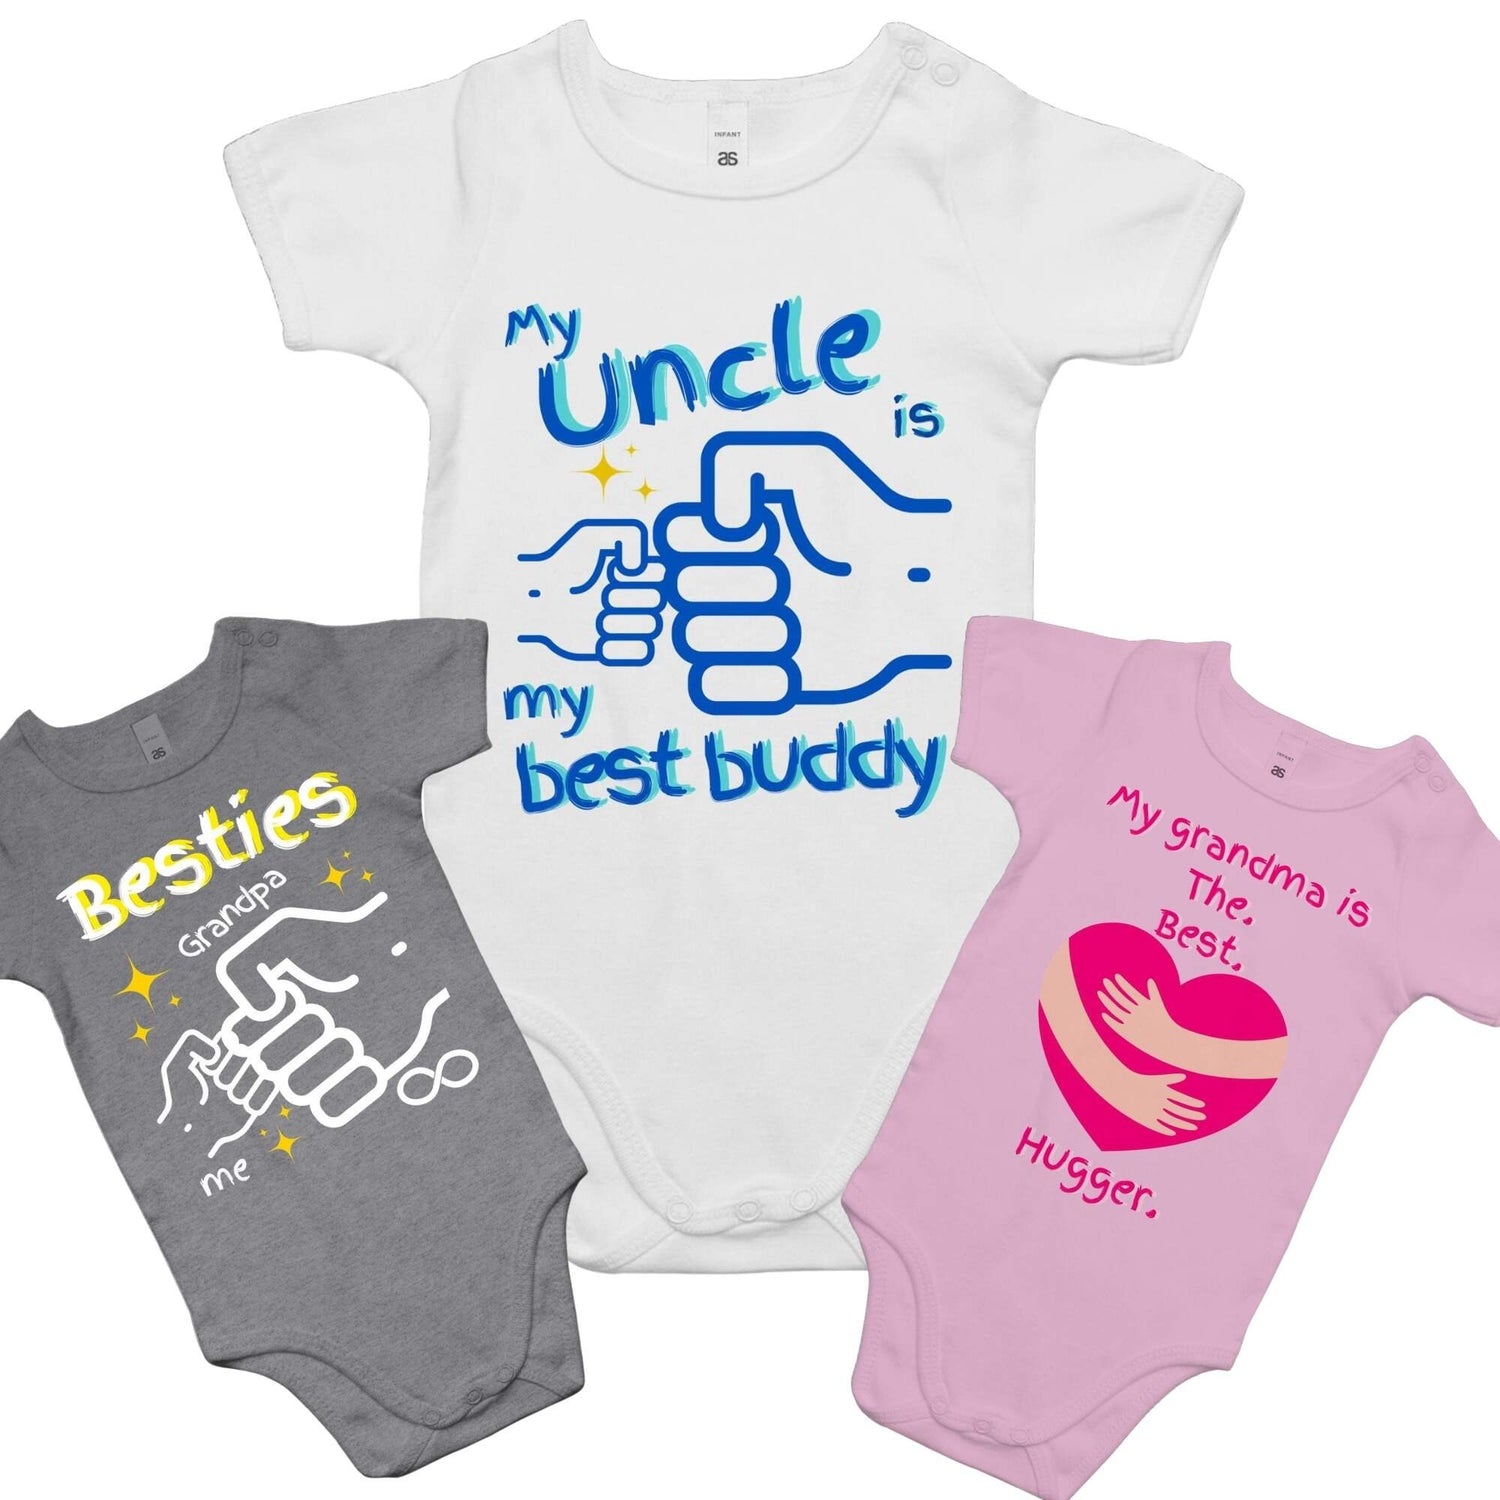 Super soft baby rompers in white, grey and pink to match with their uncle, grandpa and grandma - Da Boss Mango